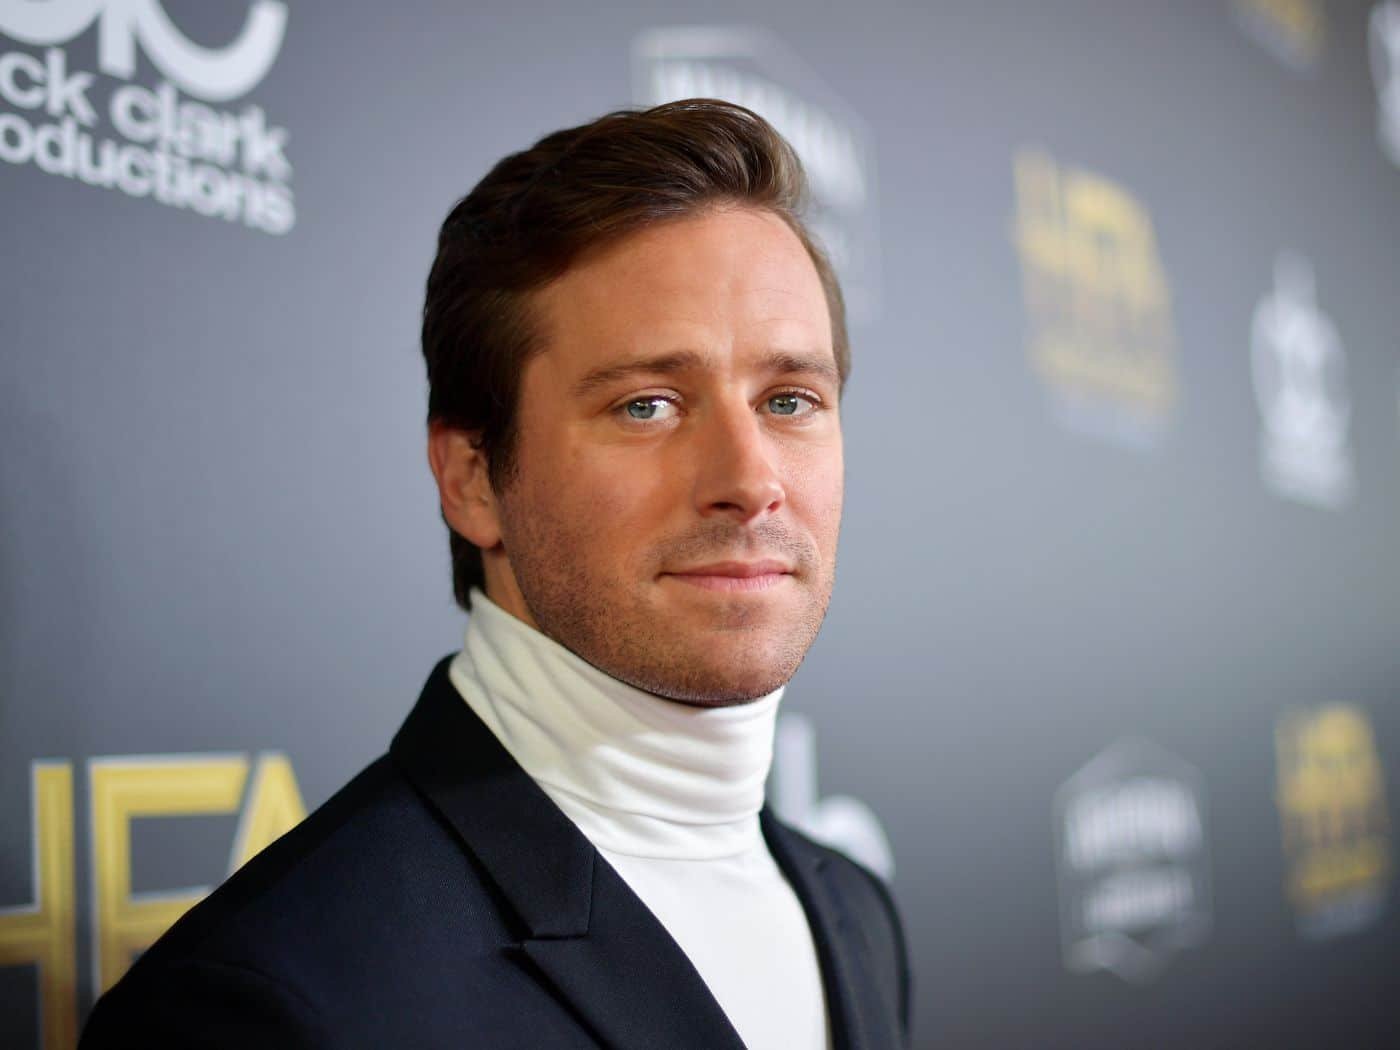 Why people hate Armie Hammer?